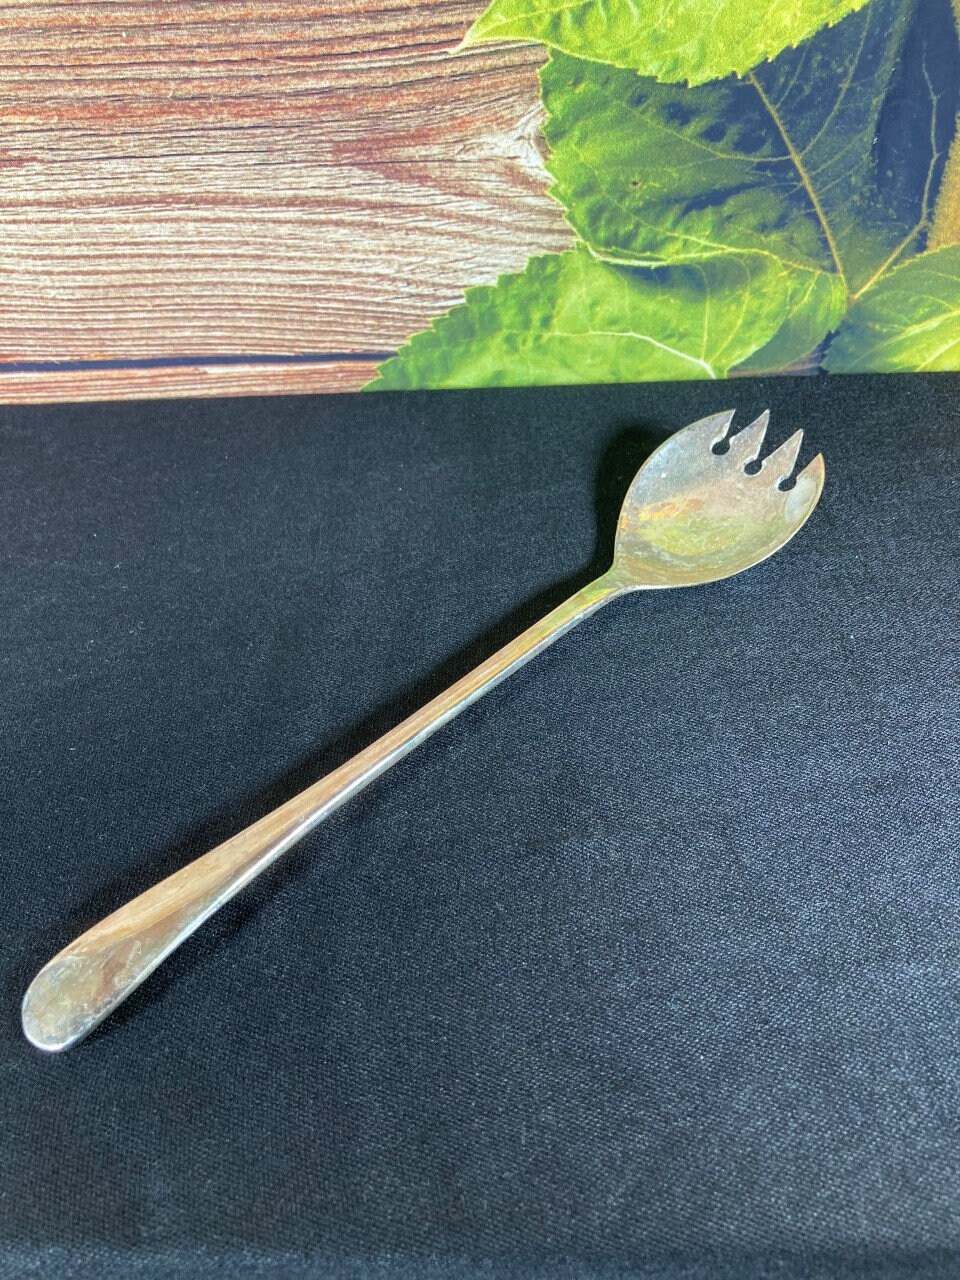 Large Serving Spoon Silver Plated Vintage Italy 1970s Salad Spoon